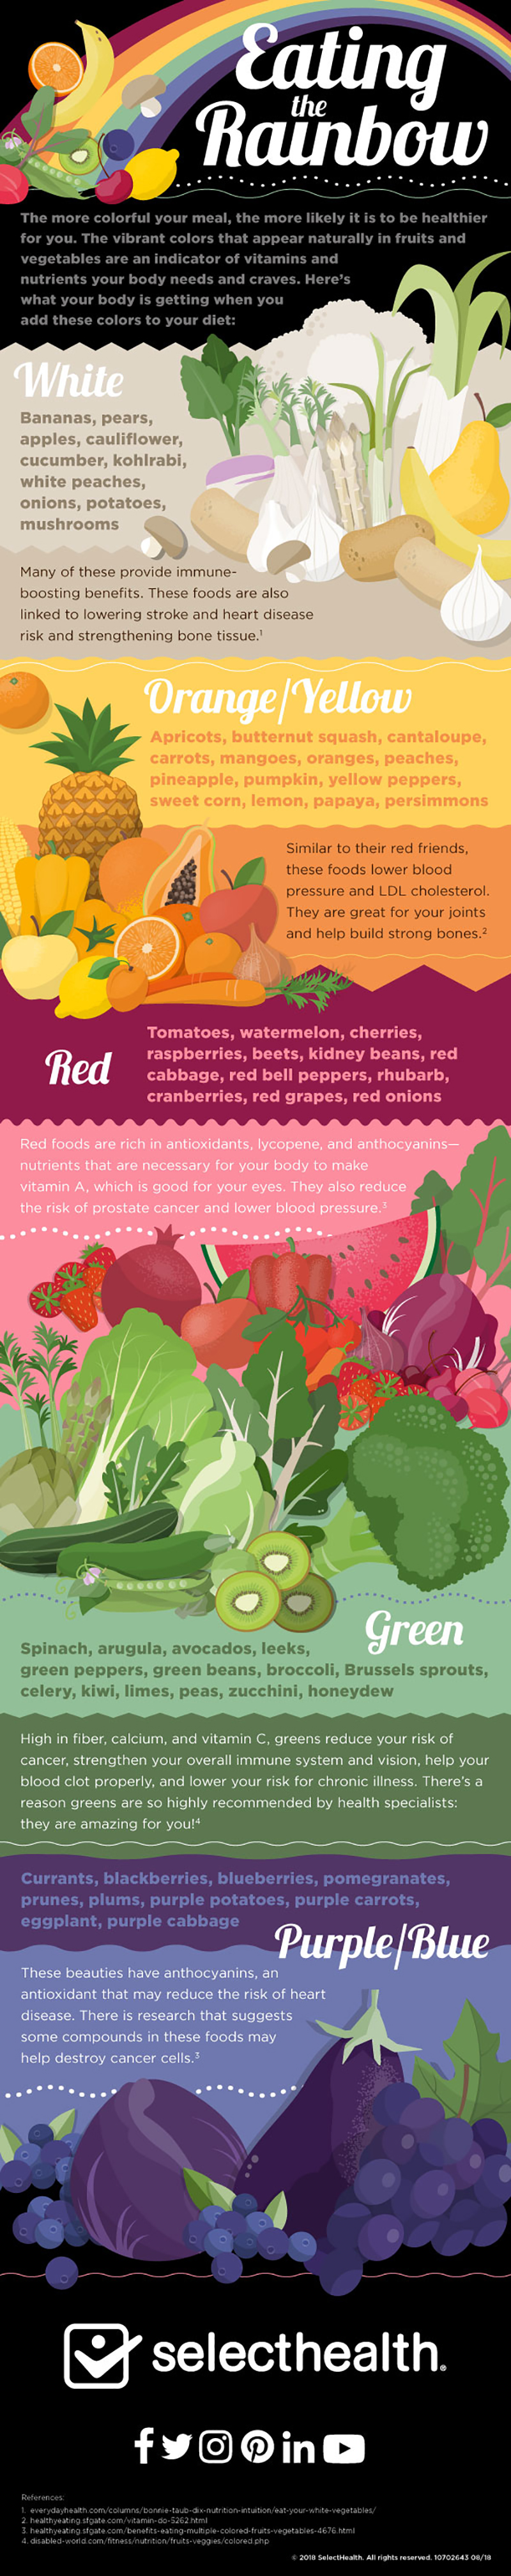 Infographic illustrating different ways to incorporated color into your diet, eating the rainbow